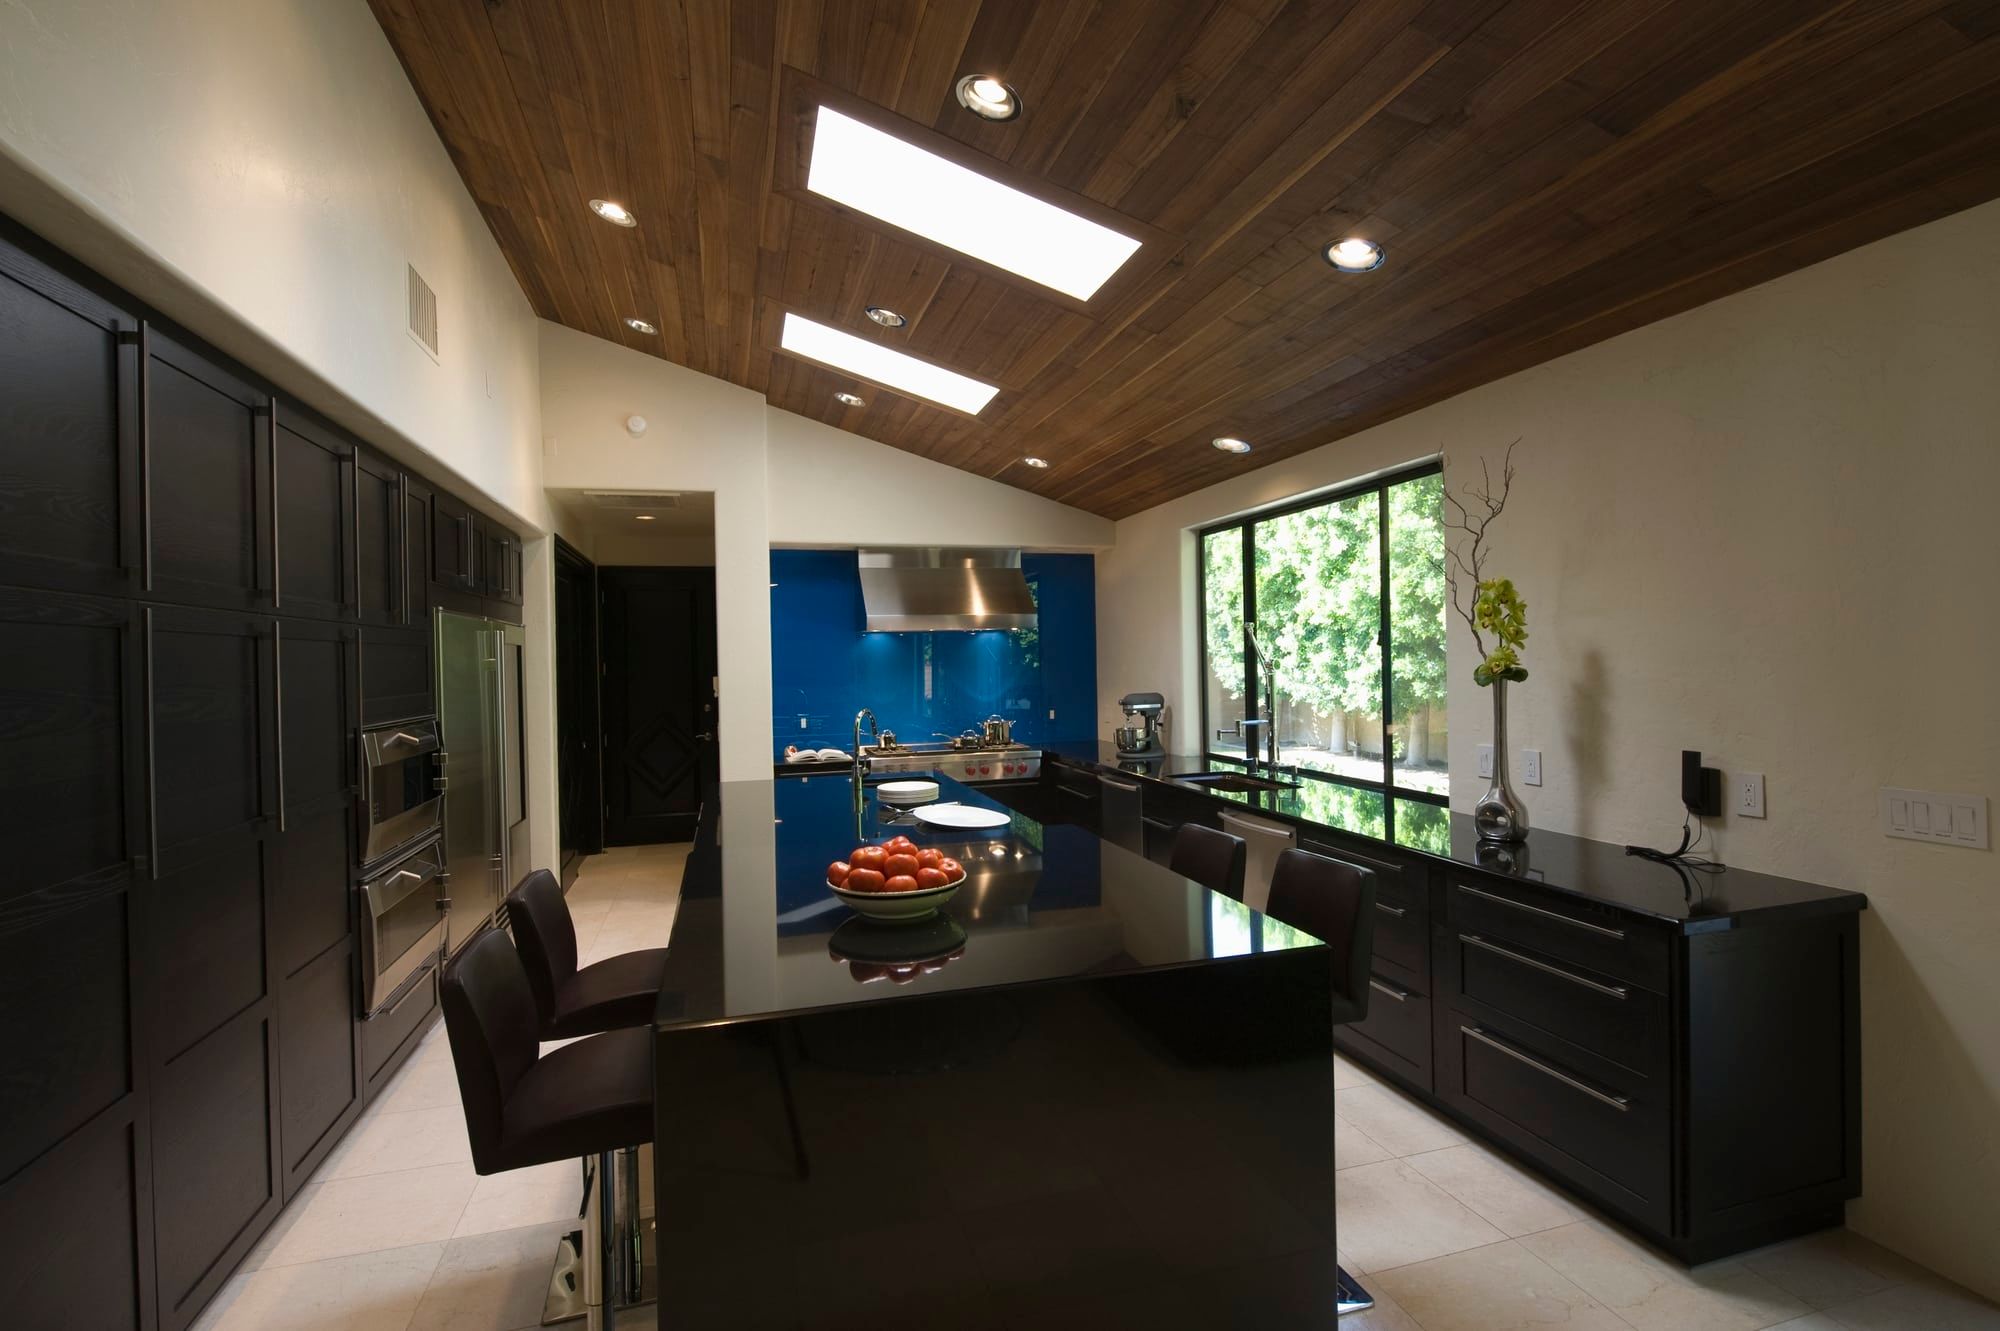 Kitchen with skylights